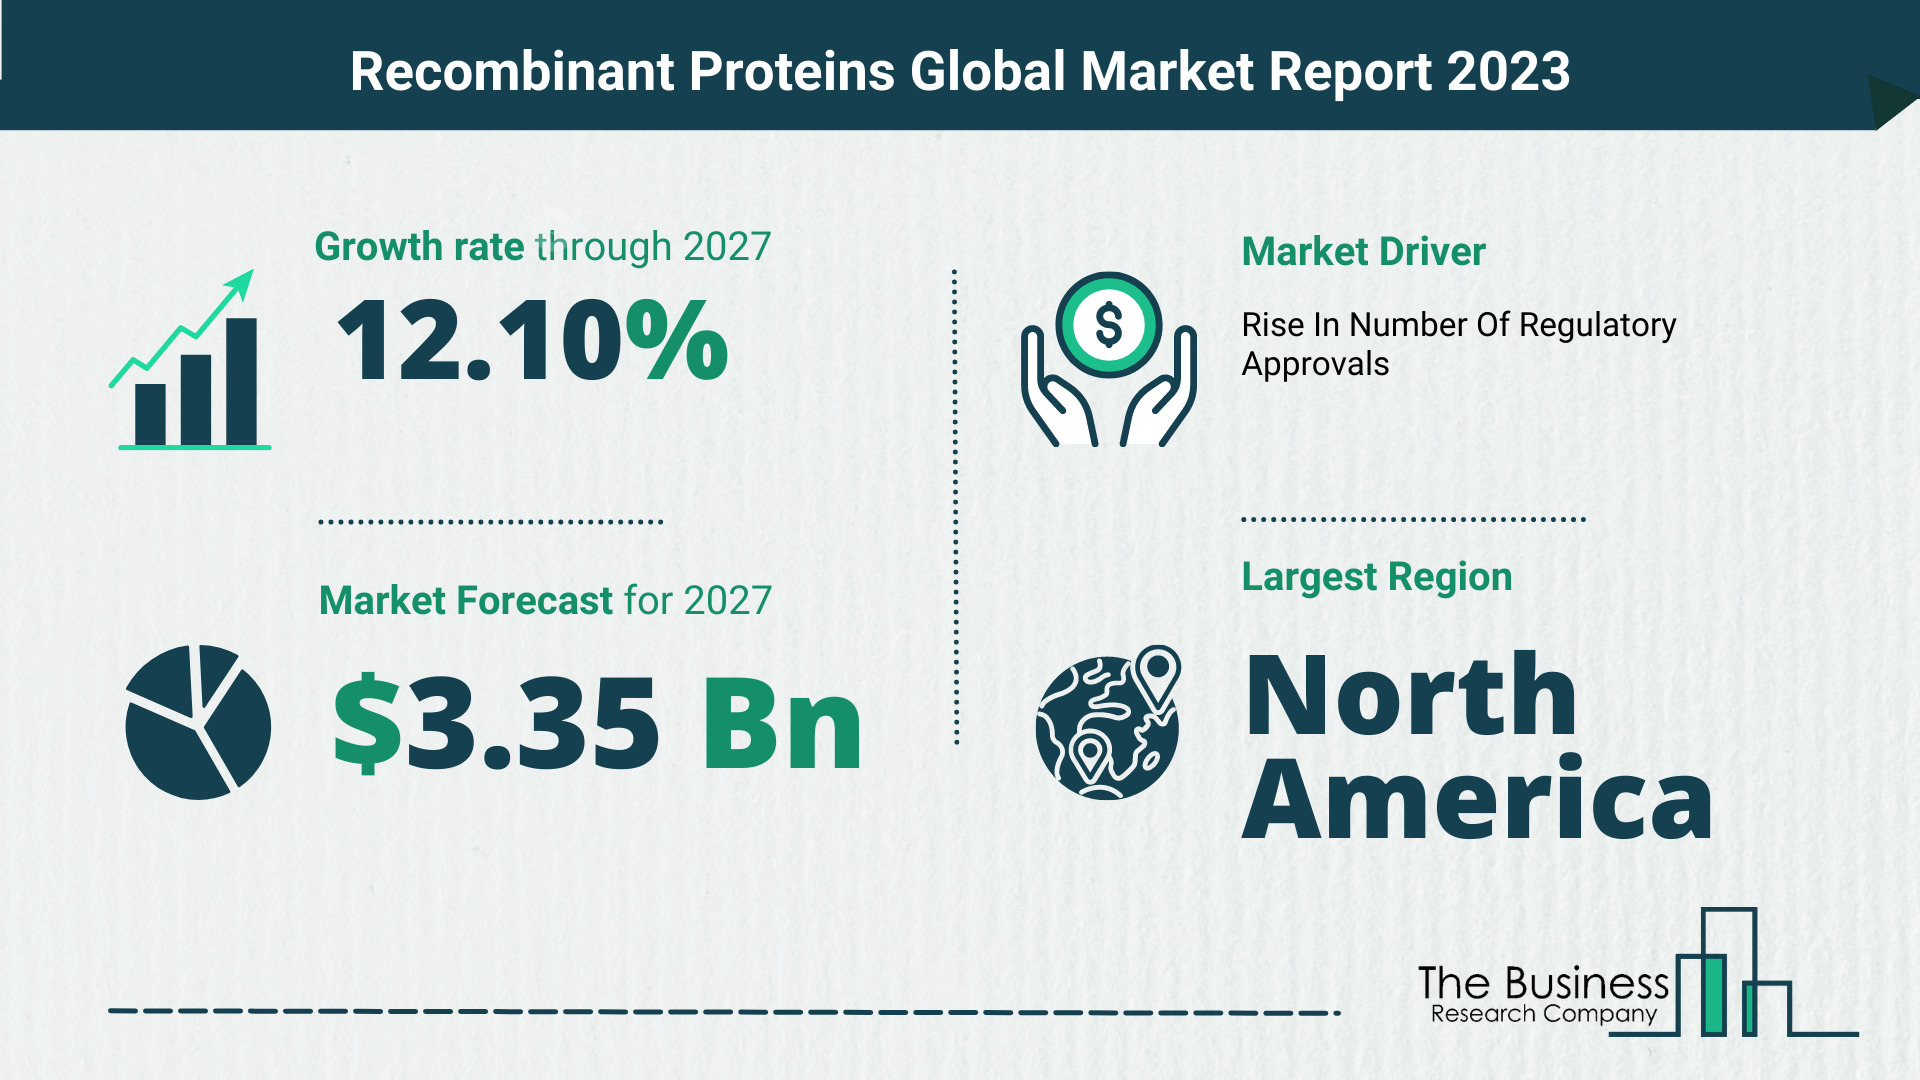 Global Recombinant Proteins Market Size